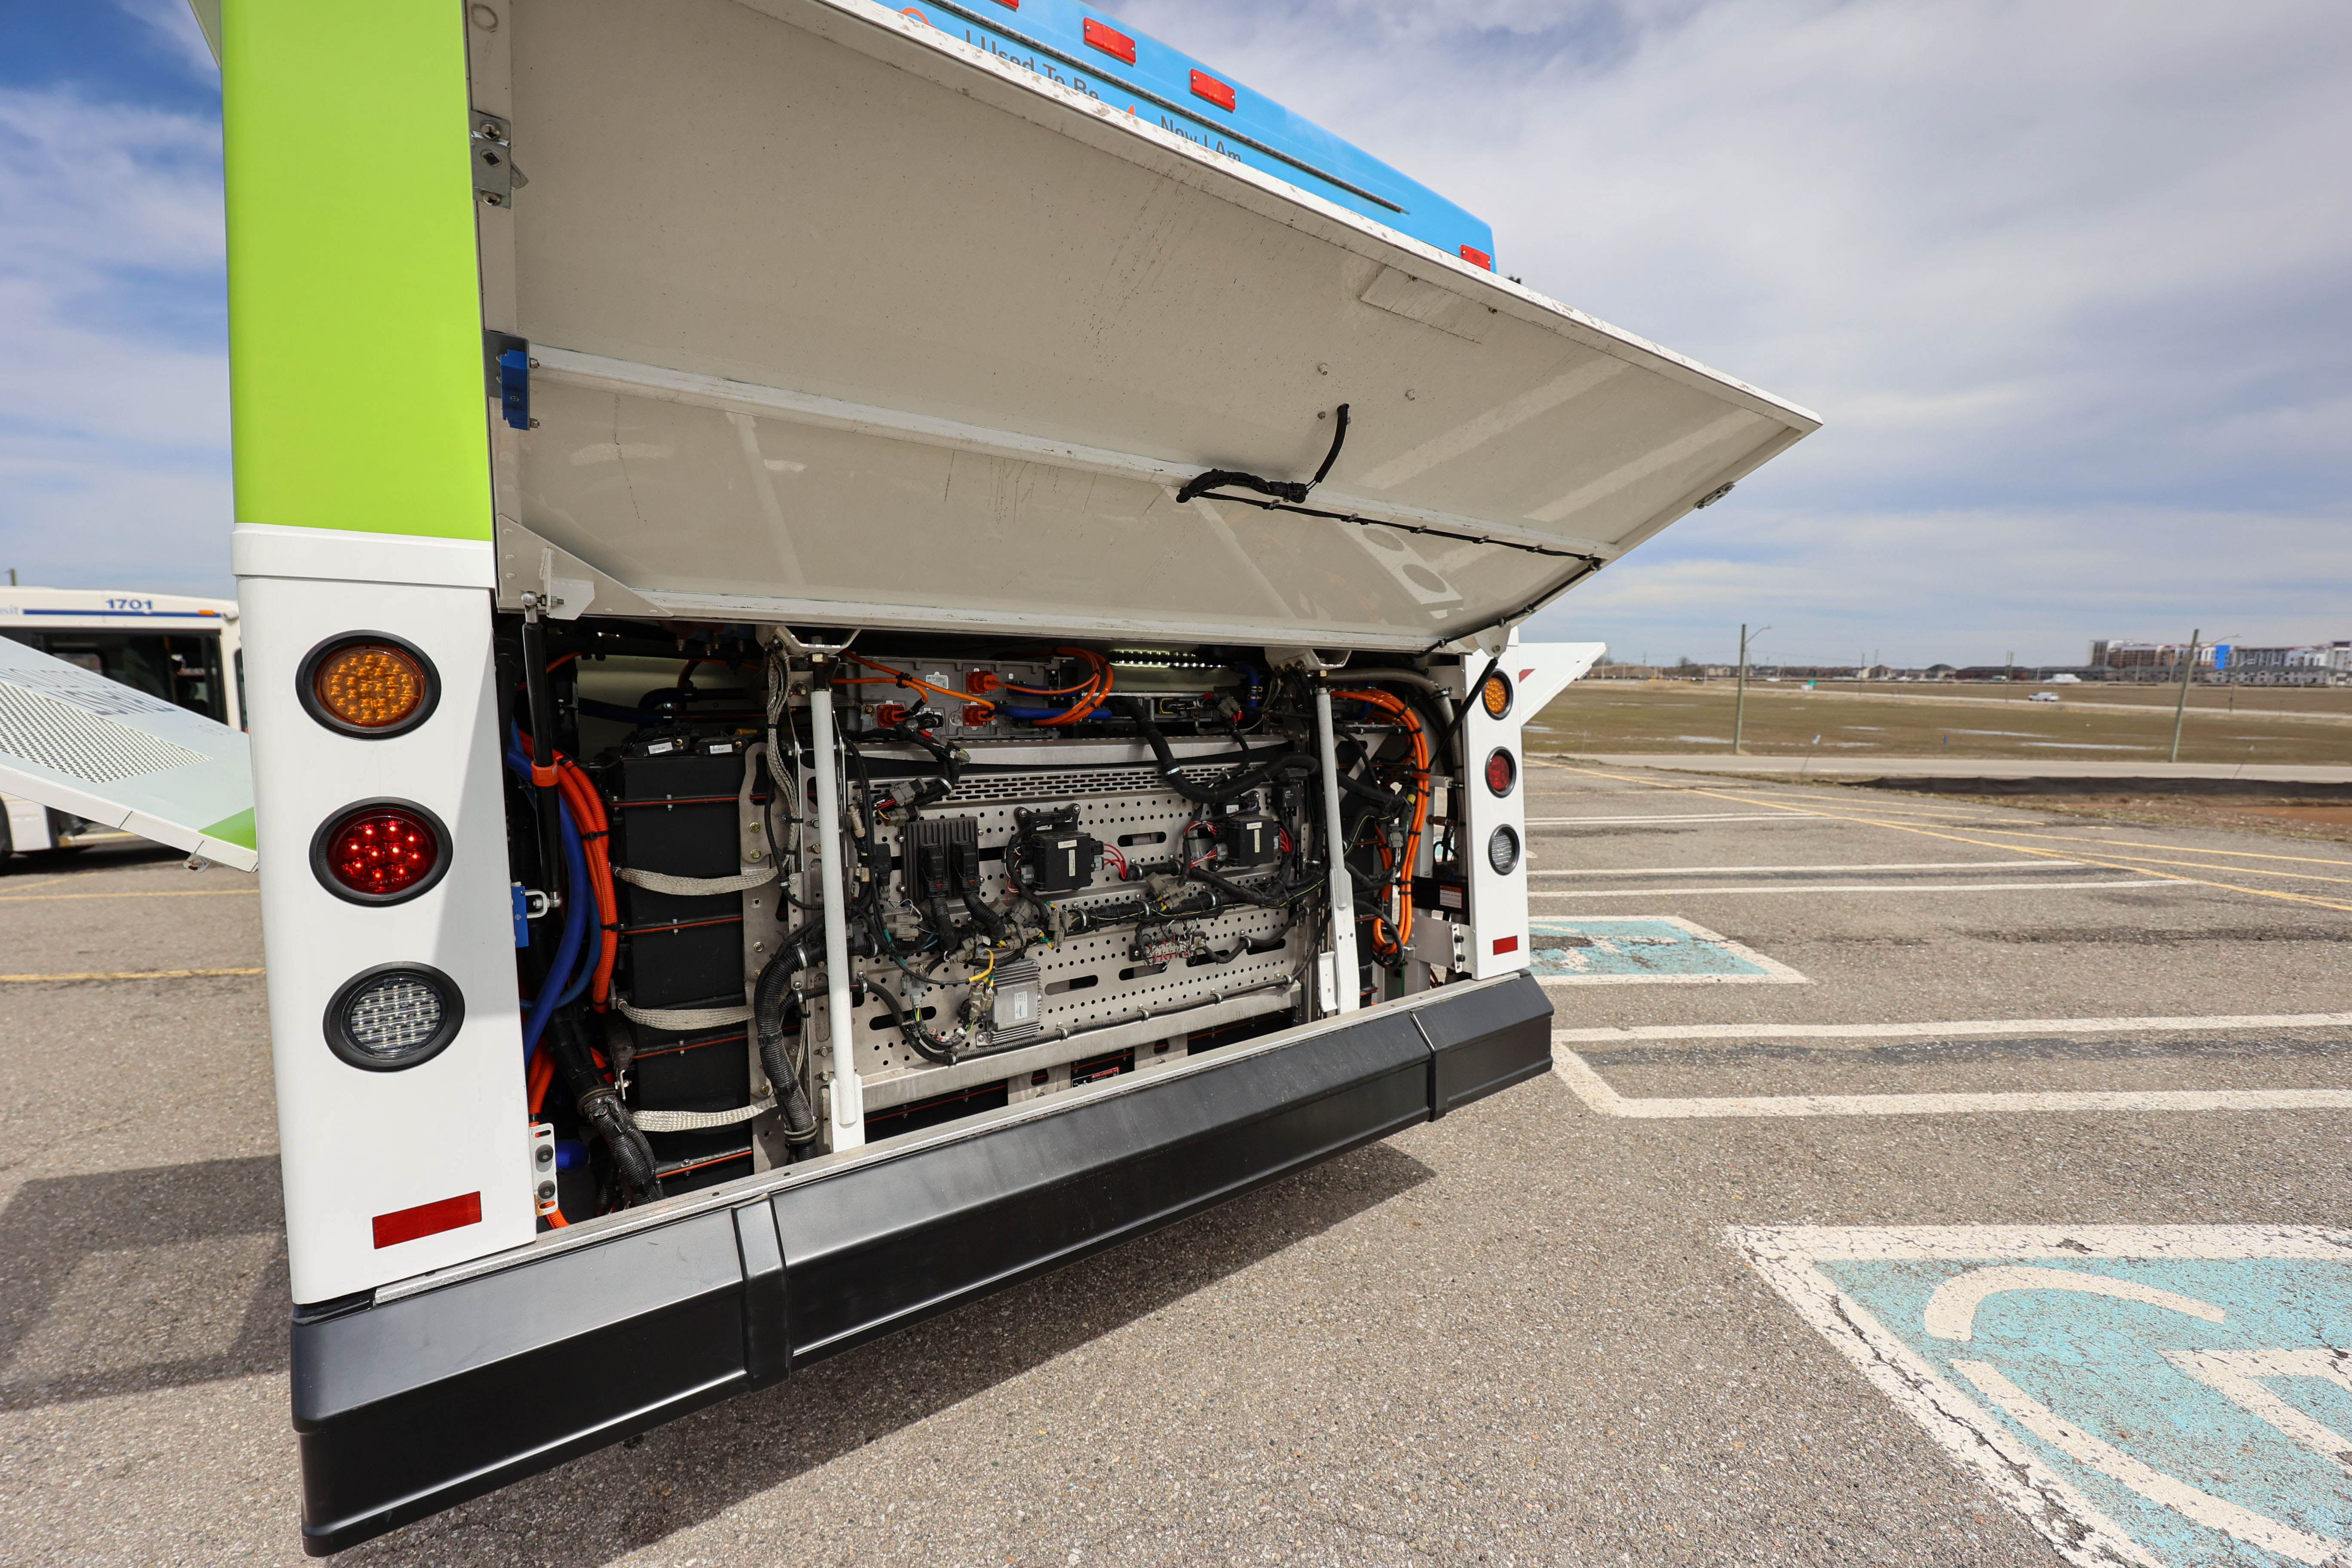 A view of the rear battery on an e-bus